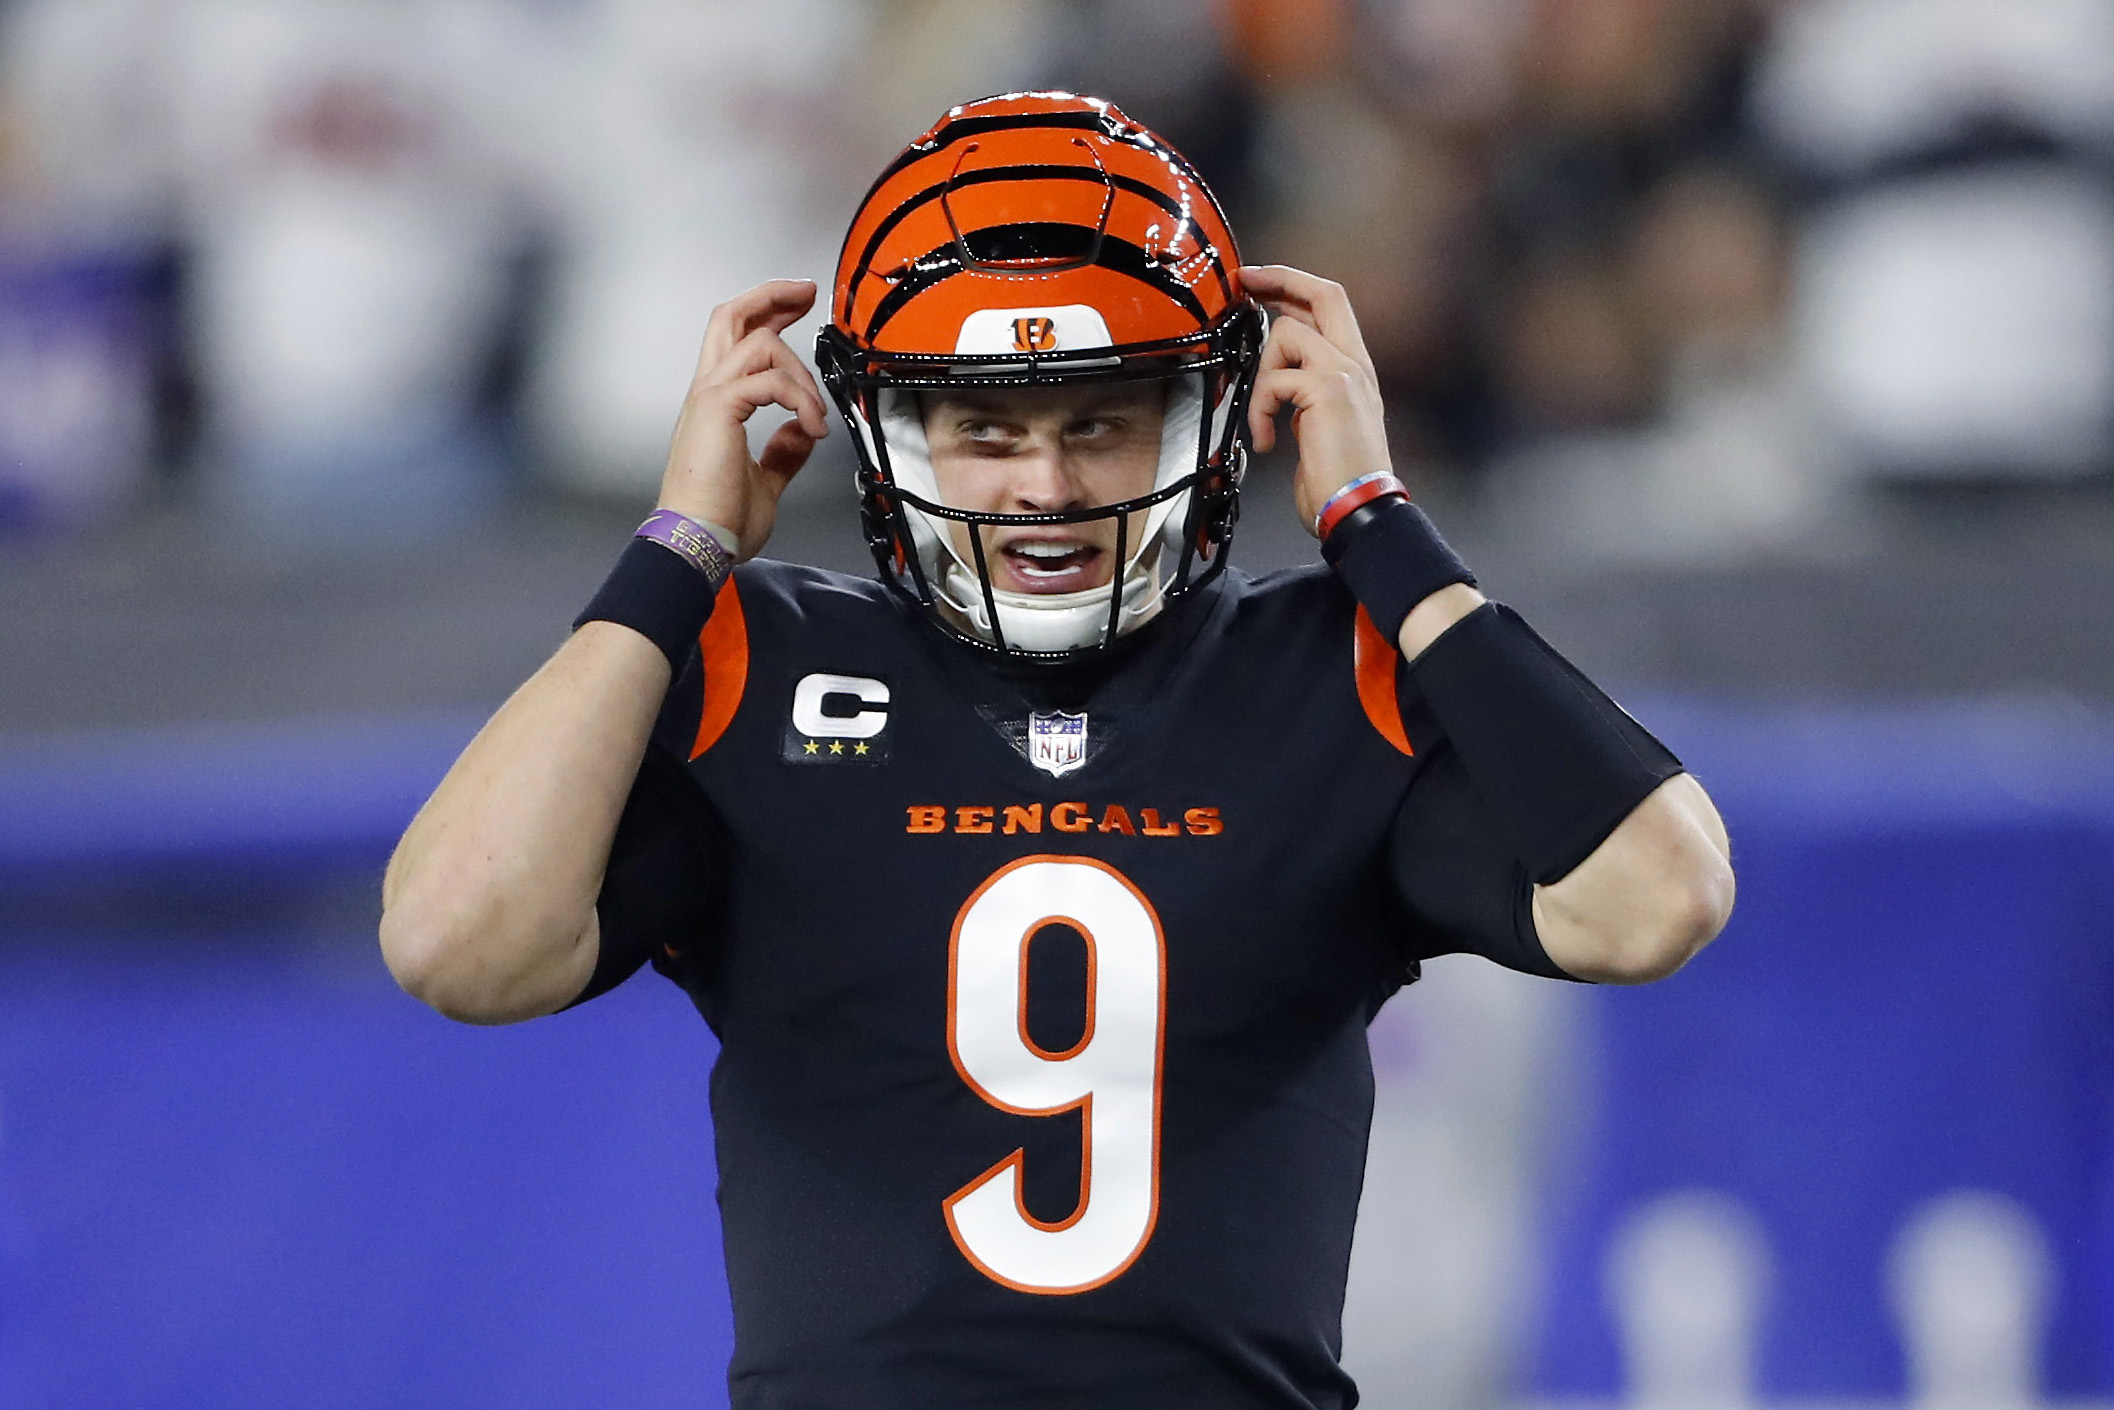 Bengals' Joe Burrow Unwittingly Wore His Backup's Jersey to Press  Conference - Sports Illustrated